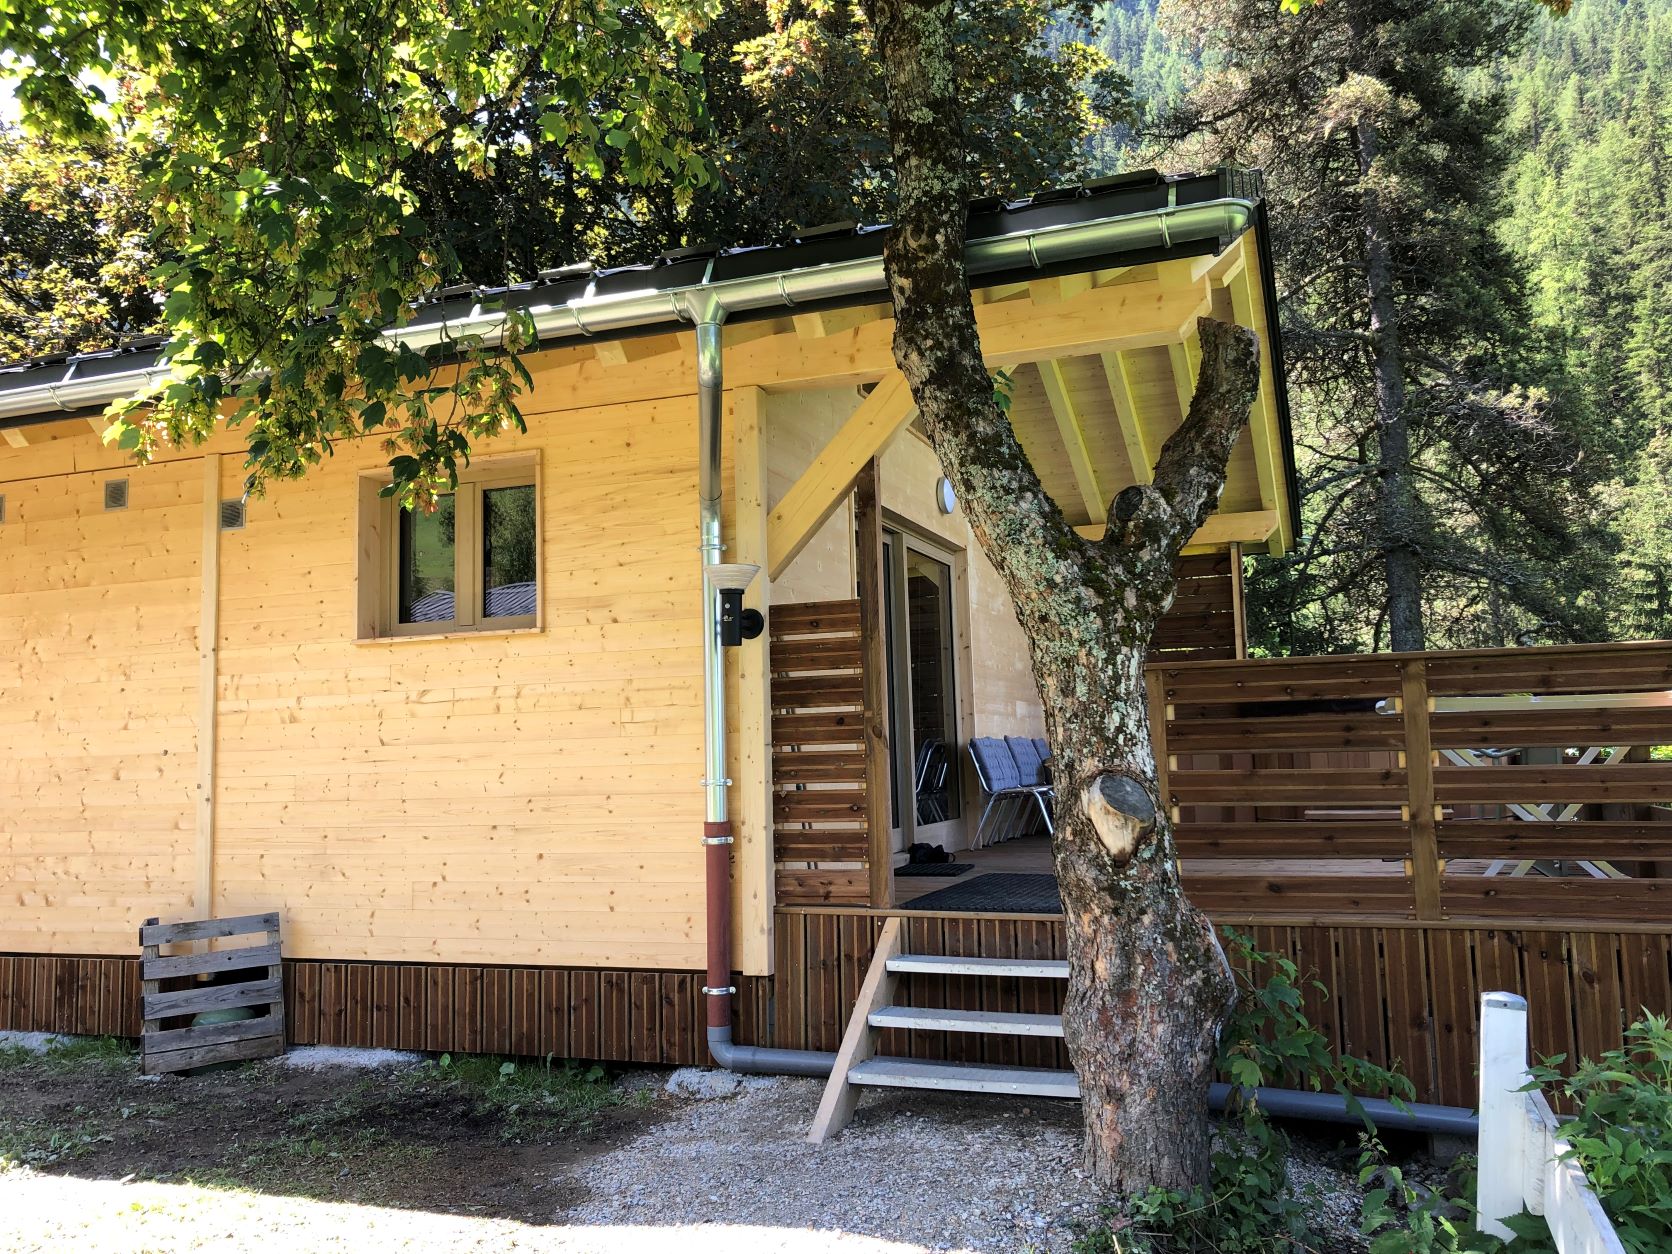 Accommodation - Gamme Chrystal - Chalet Ulysse 54M² 3 Bedrooms + Semi-Covered Terrace 24M² With Nordic Bath - Camping Les Lanchettes